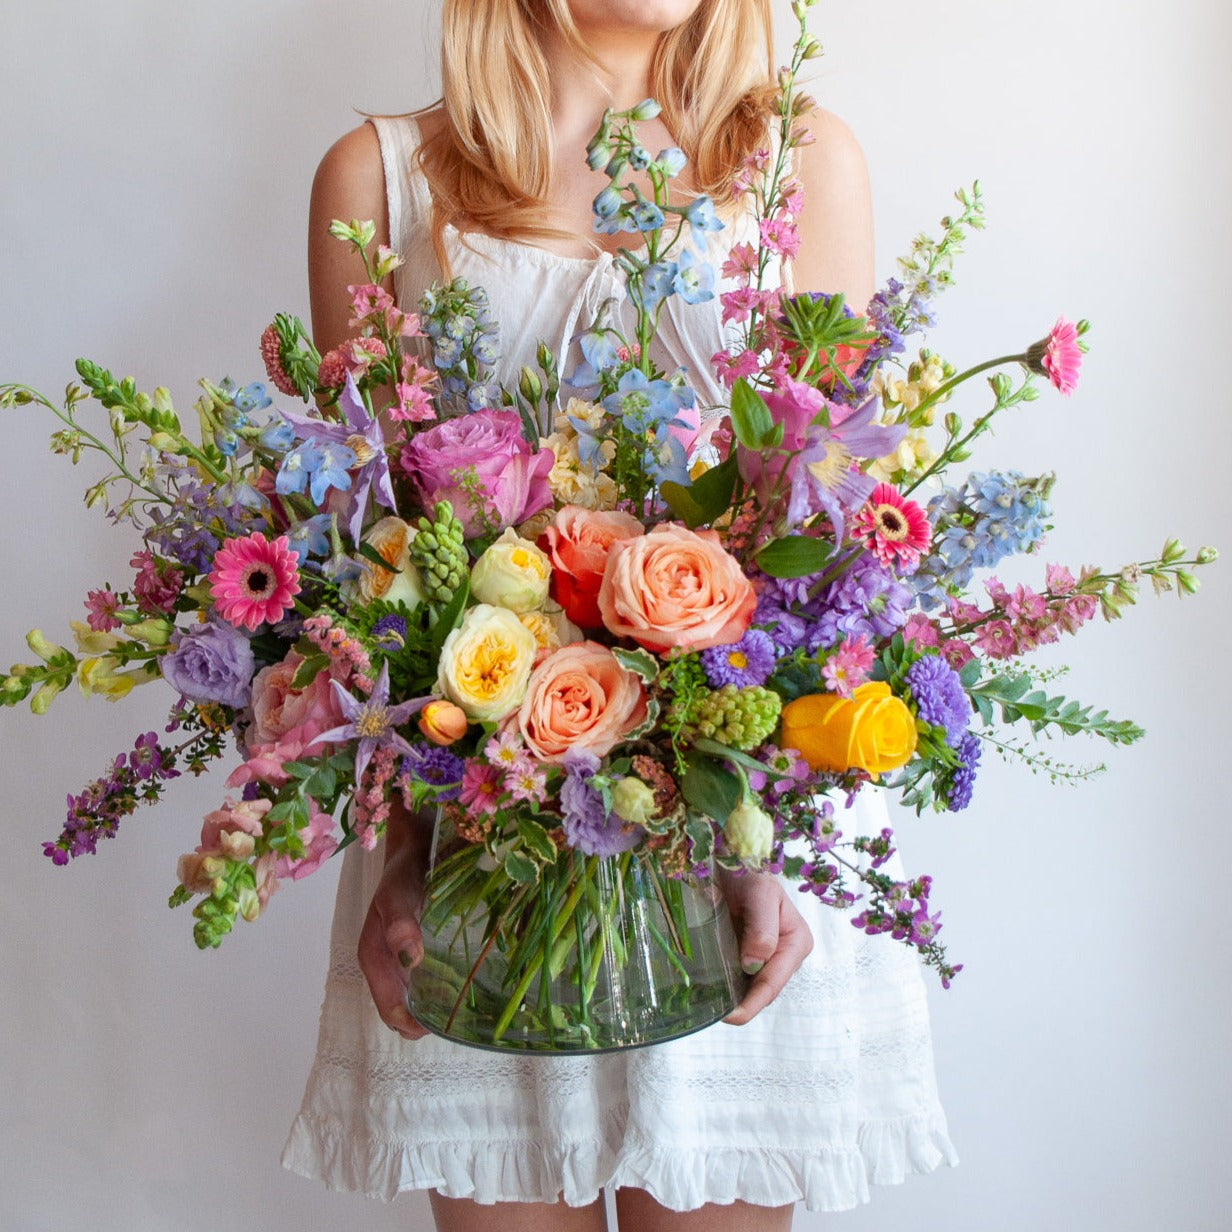 a woman in a white dress holds a glass vase with a large flower arrangement in it. The flowers are many colors and include roses, tulips, daisies, snapdragon, clematis, stock, hyacinth, and delphinium.